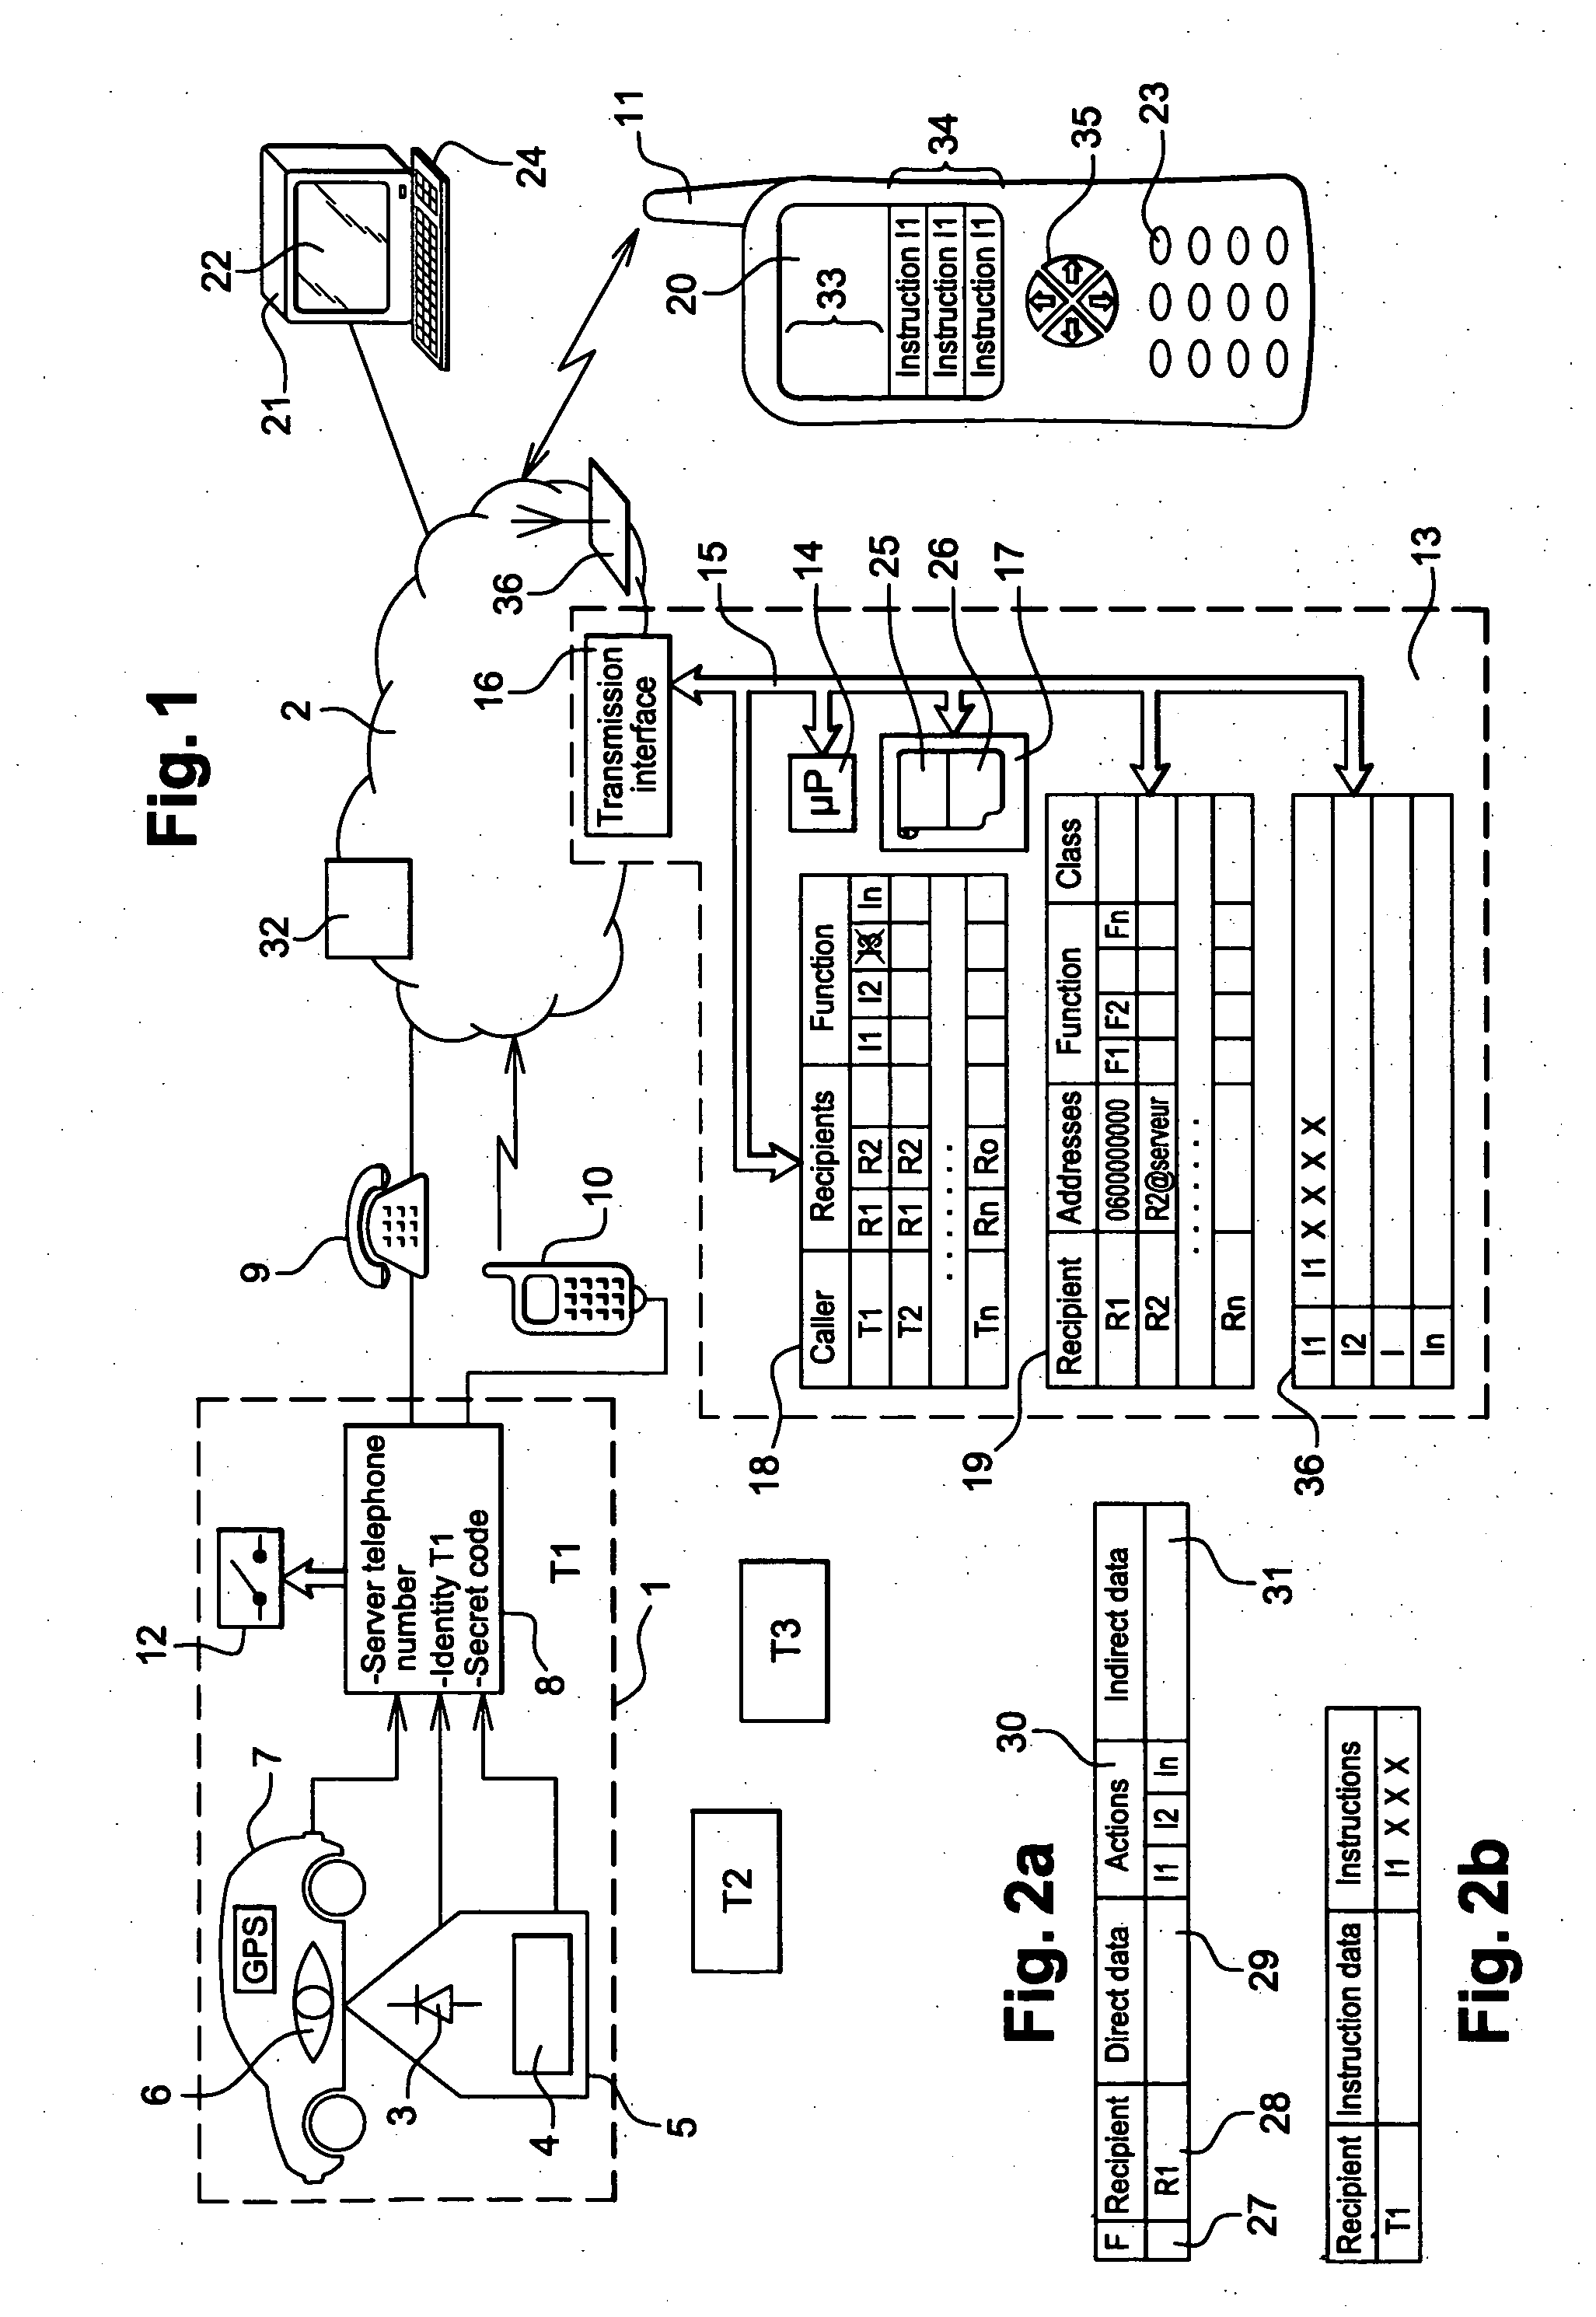 Remote-control method and device